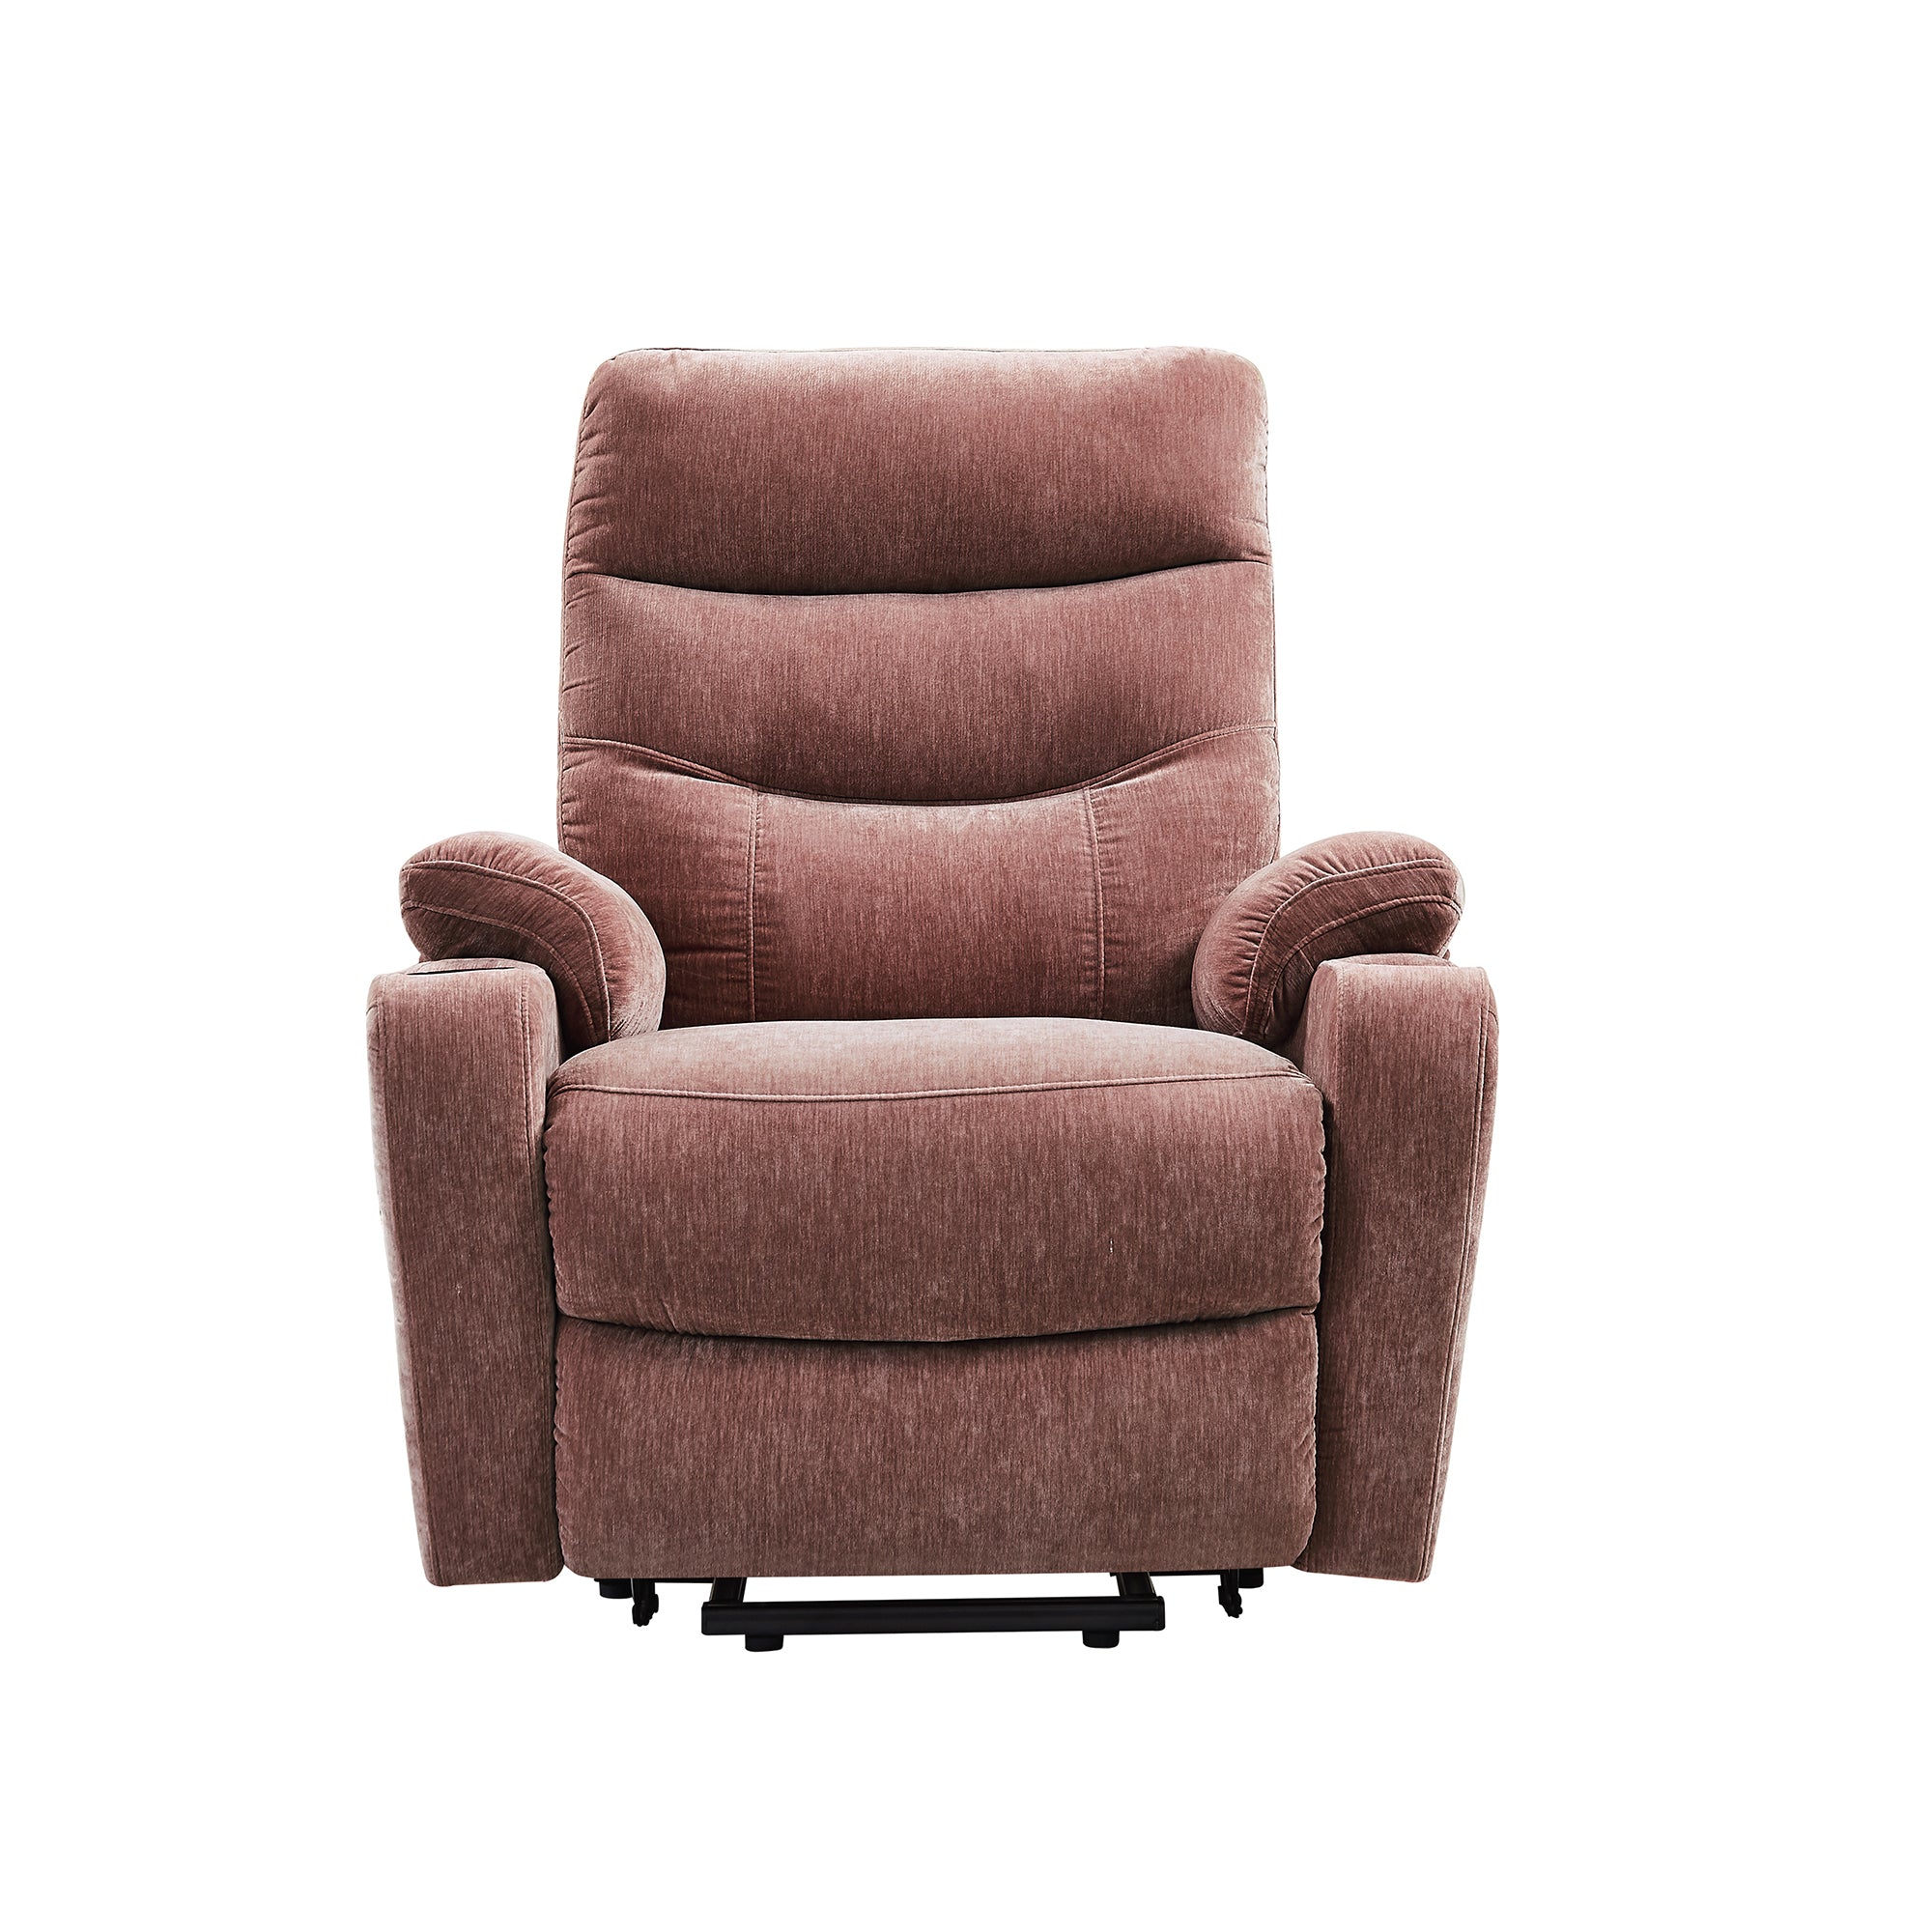 Rose Power Lift Chair Front Profile